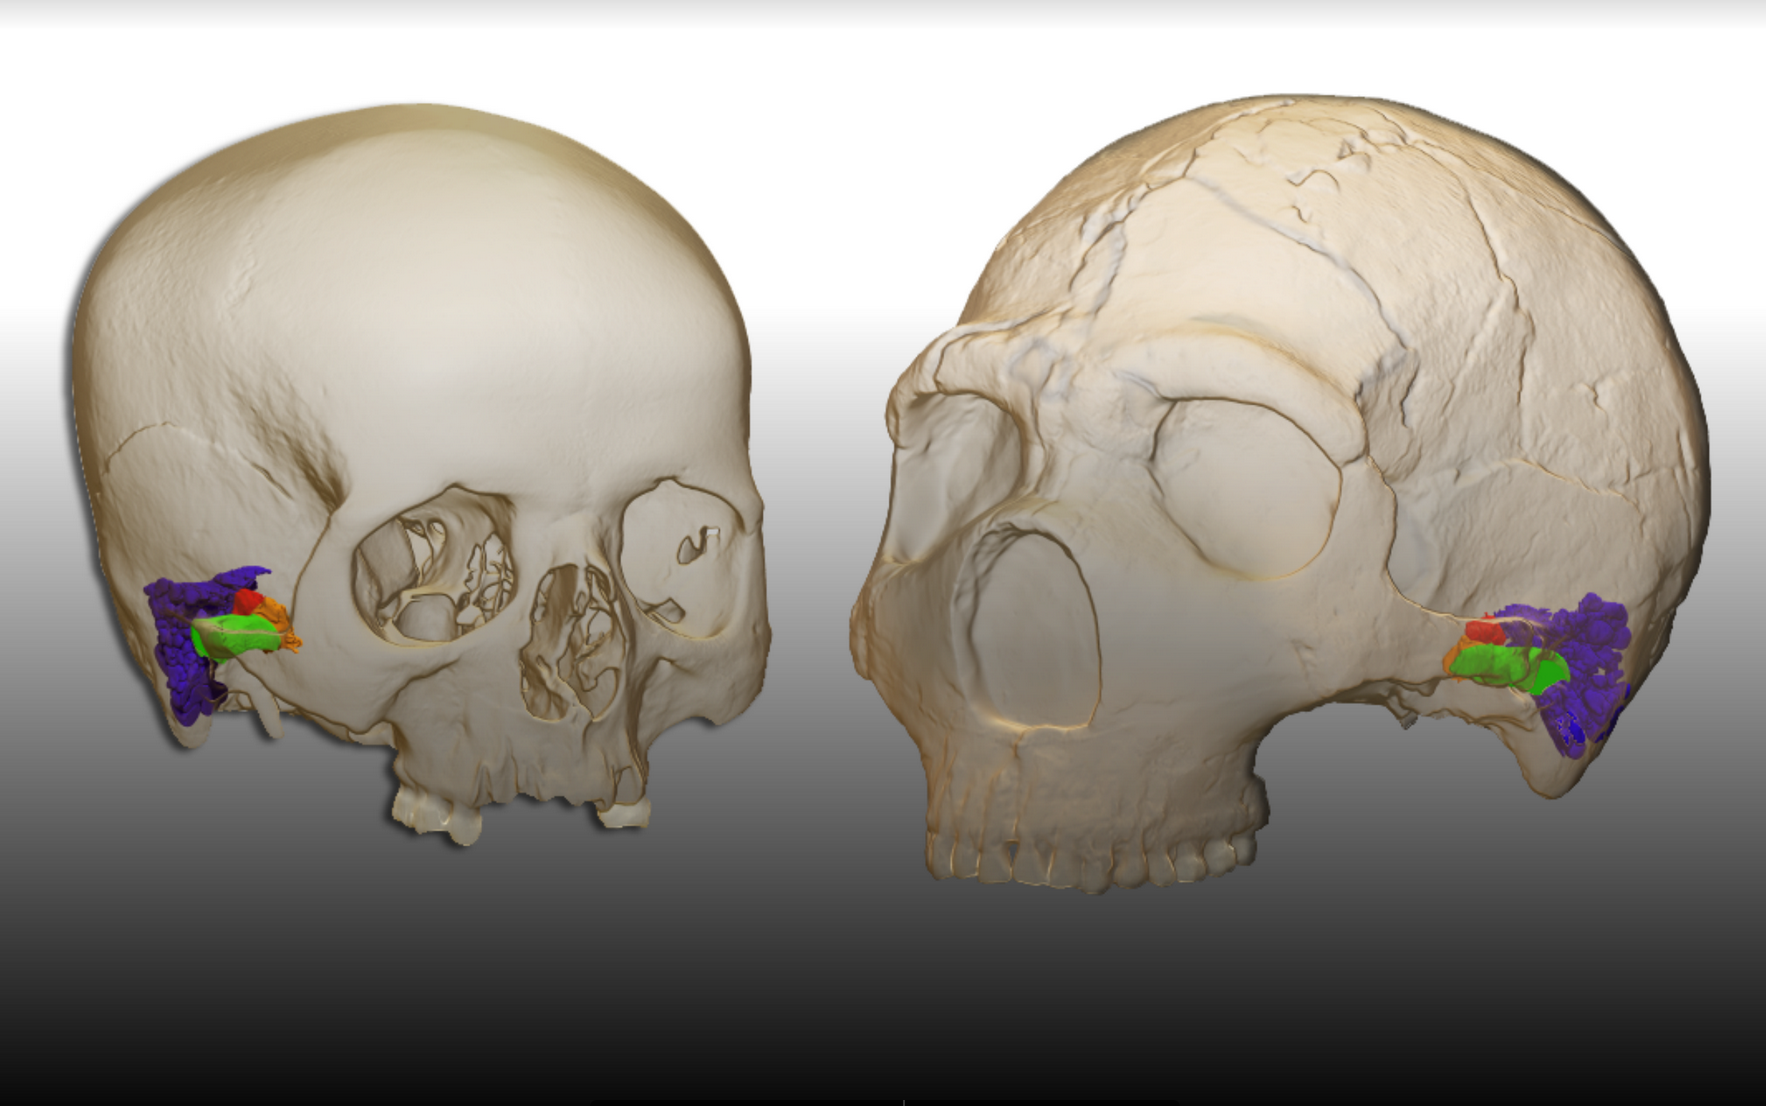 3D model reconstruction of the ear in a modern human (left) and the ear of a Neanderthal (right). The image shows color regions which are similar in both species.